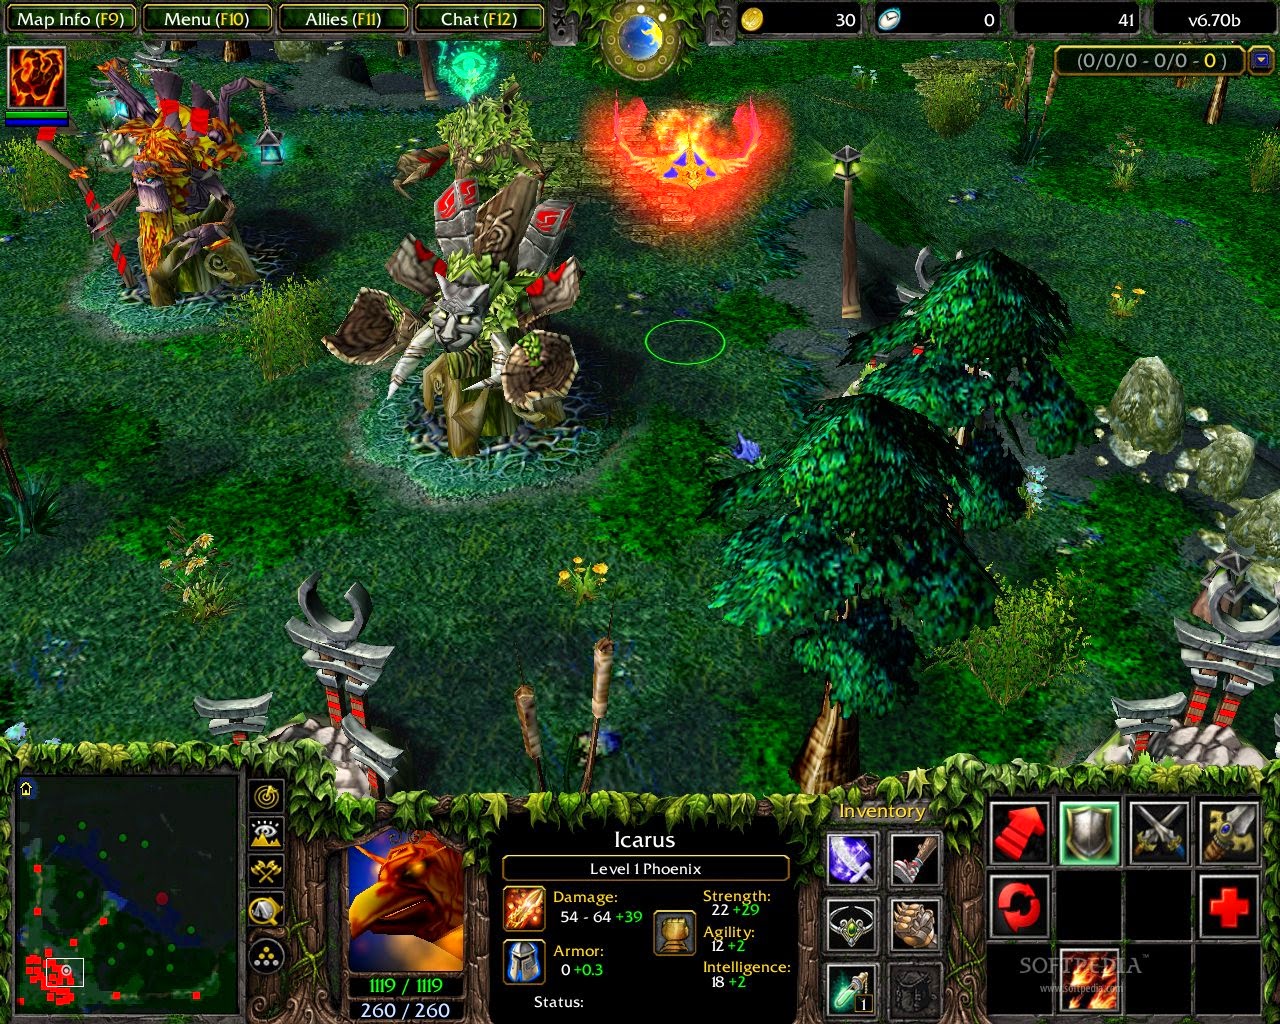 warcraft iii patches